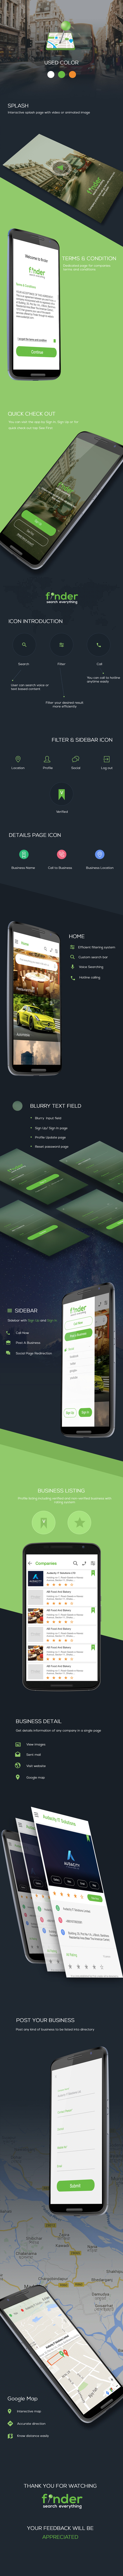 Finder - Android Directory App Template - 1